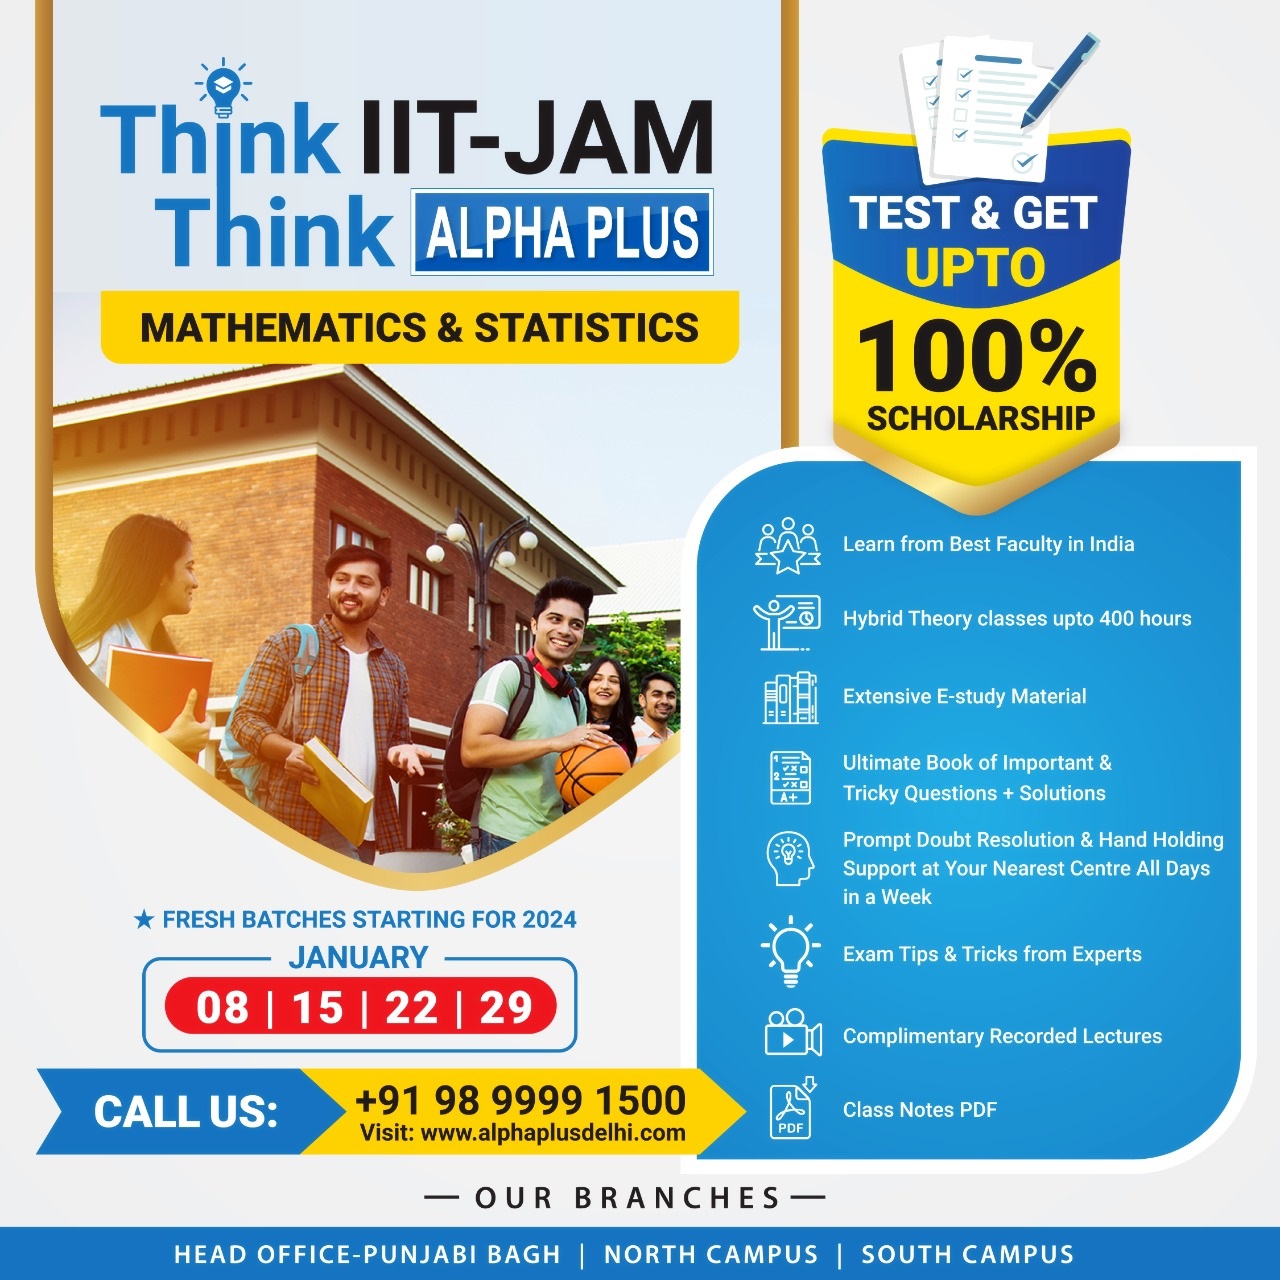 Best IIT-JAM Coaching in DelhiEducation and LearningCoaching ClassesWest DelhiPunjabi Bagh